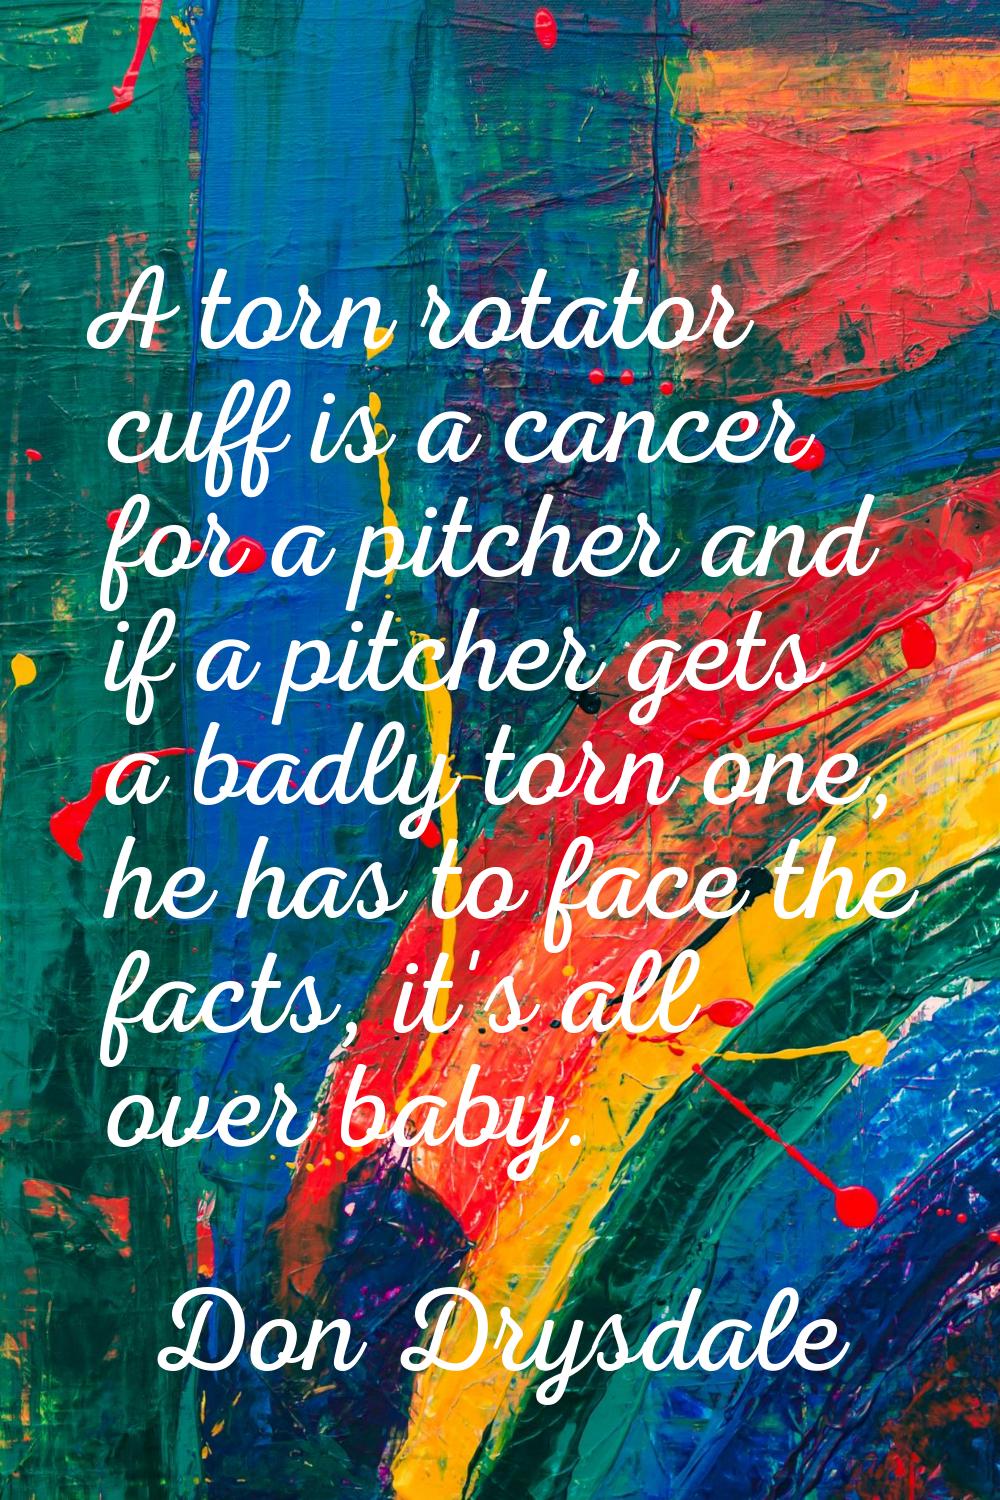 A torn rotator cuff is a cancer for a pitcher and if a pitcher gets a badly torn one, he has to fac